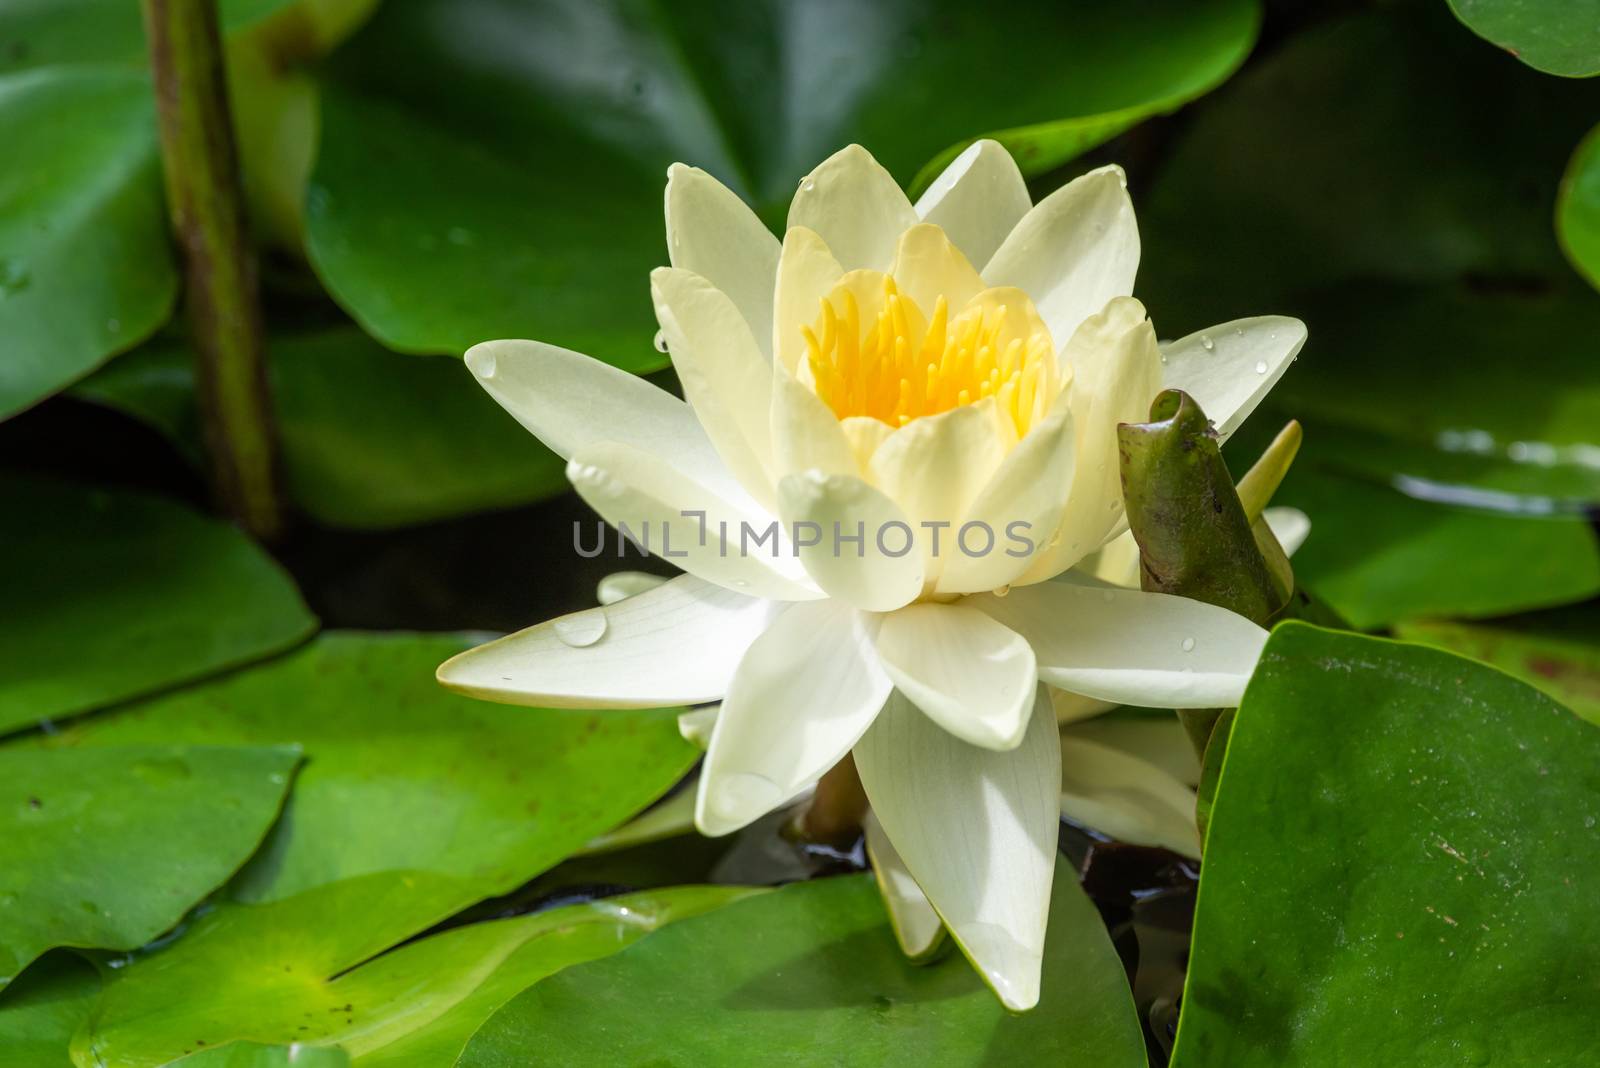 Lotus water lily and green leaves close-up view in a pond